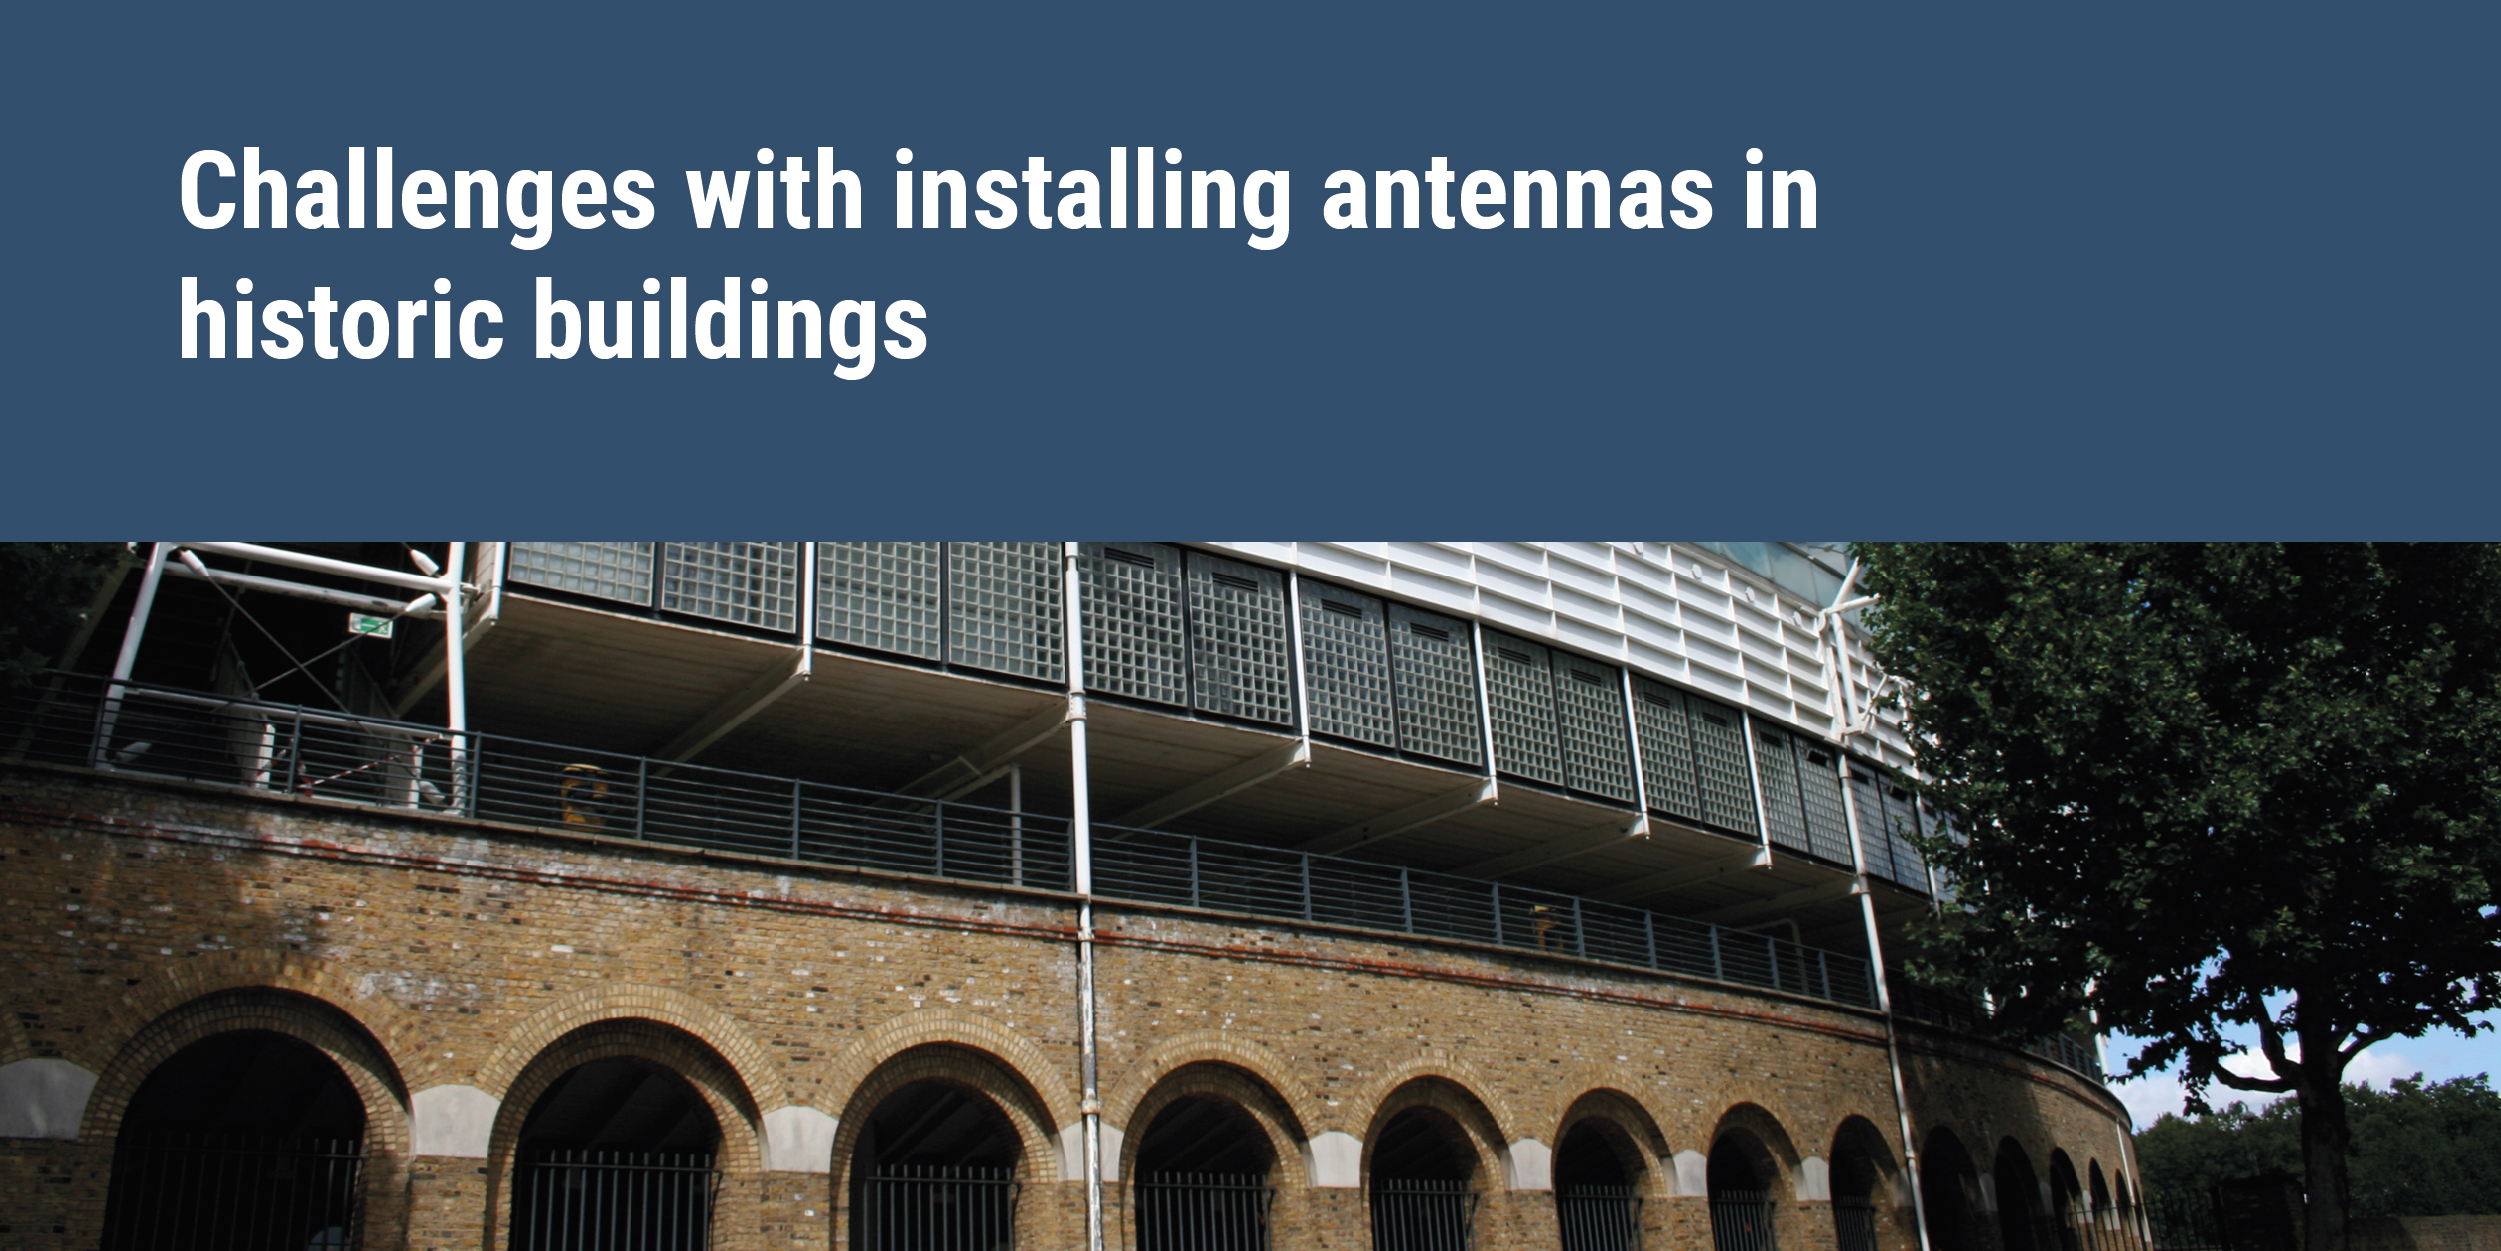 No mobile signal in your historic building? The challenges with installing antennas in historic and heritage buildings such as lords cricket ground. Mobile coverage in heritage buildings